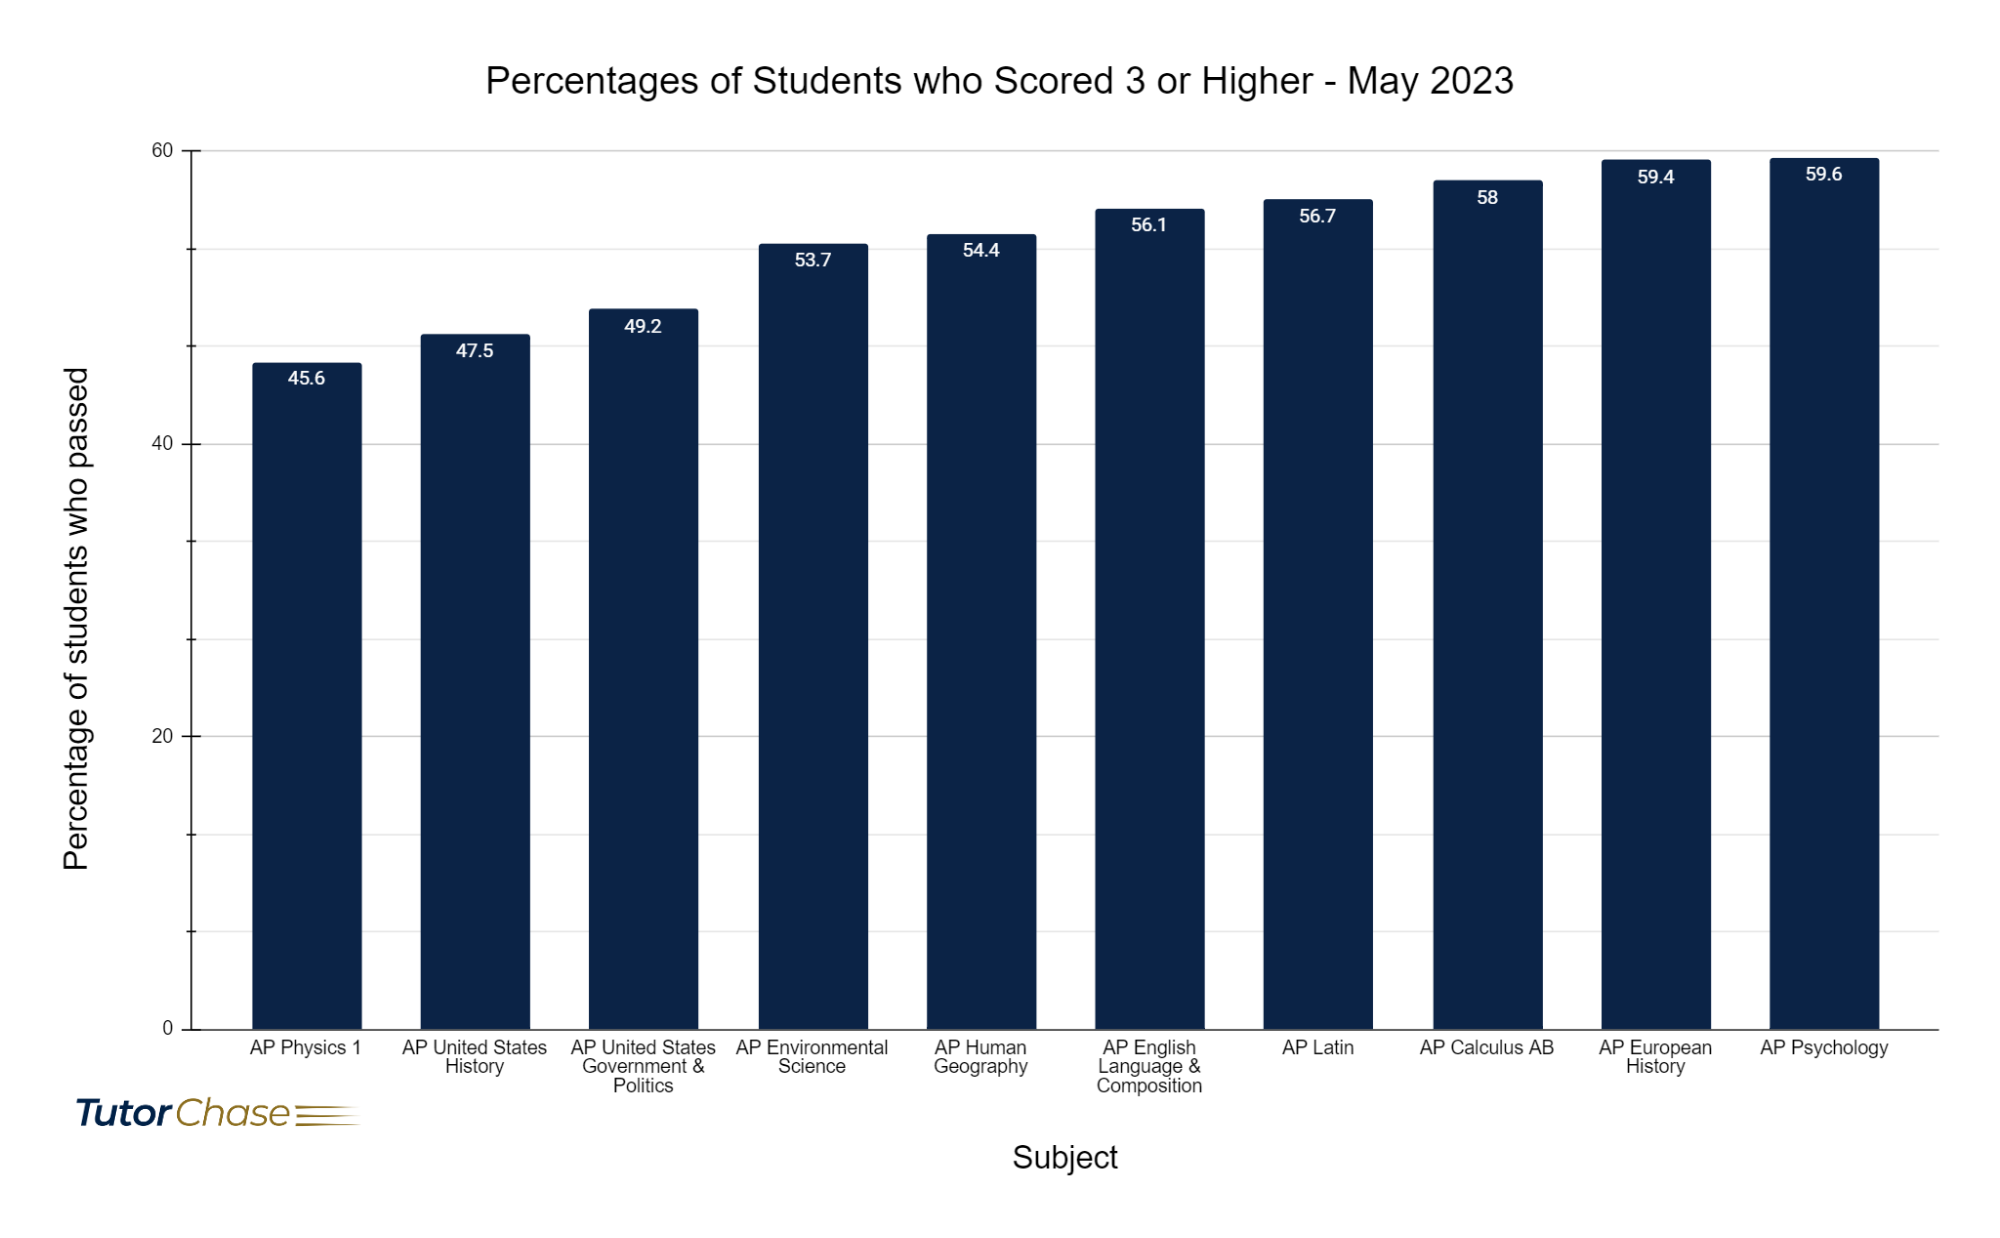 Top 10 Hardest AP Courses and the percentages of students who scored 3 or higher.